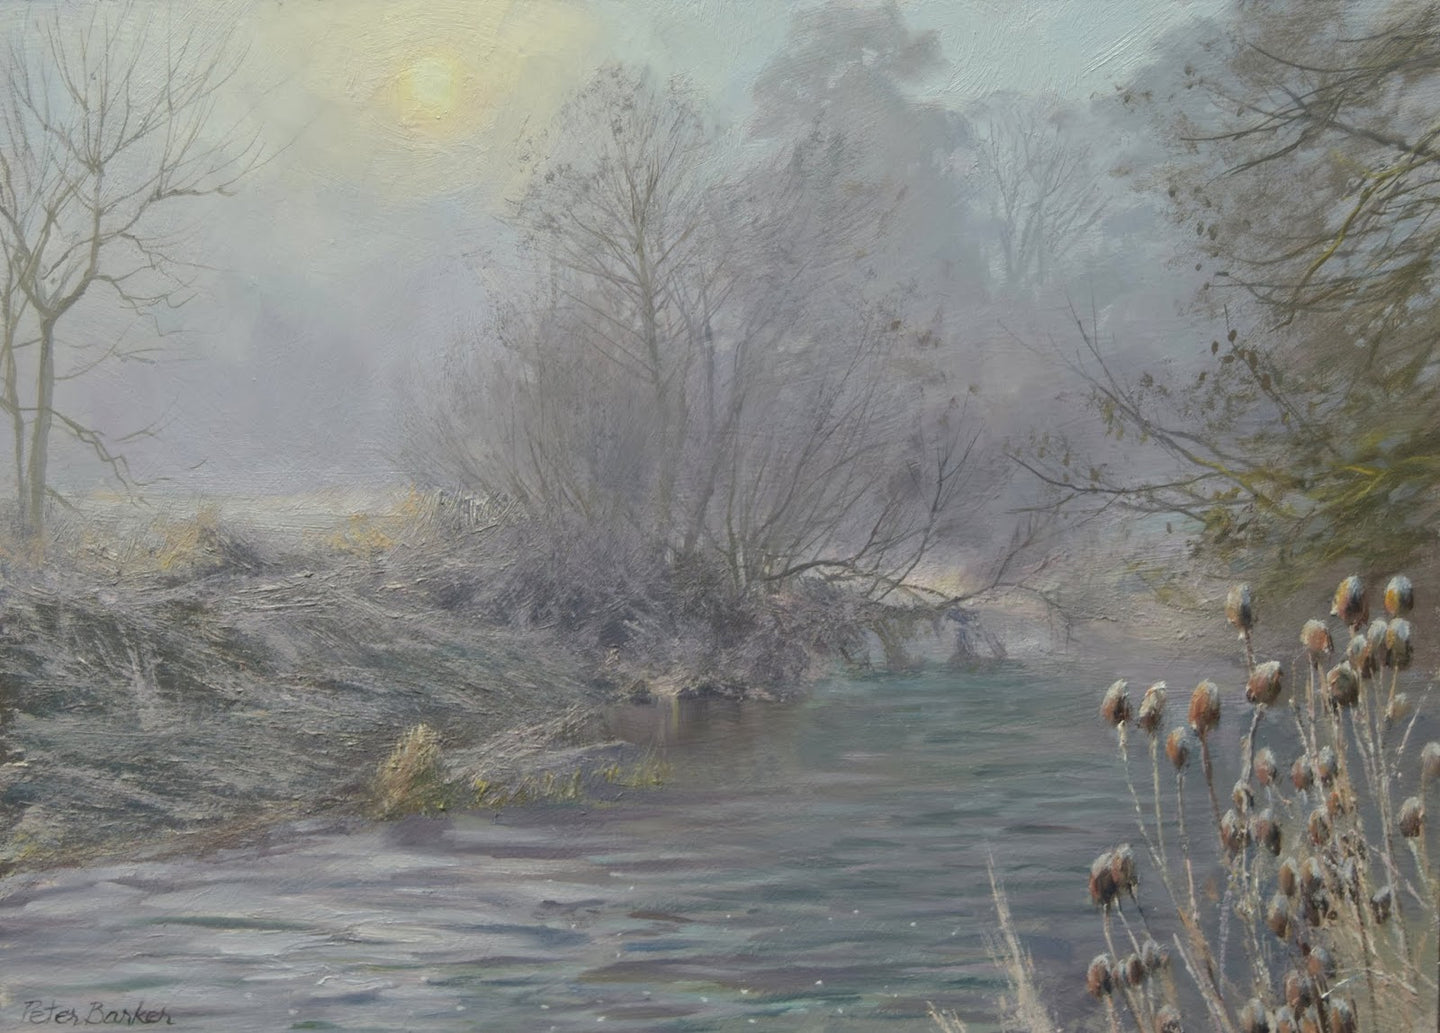 Clearing Fog at Duddington, by Peter Barker